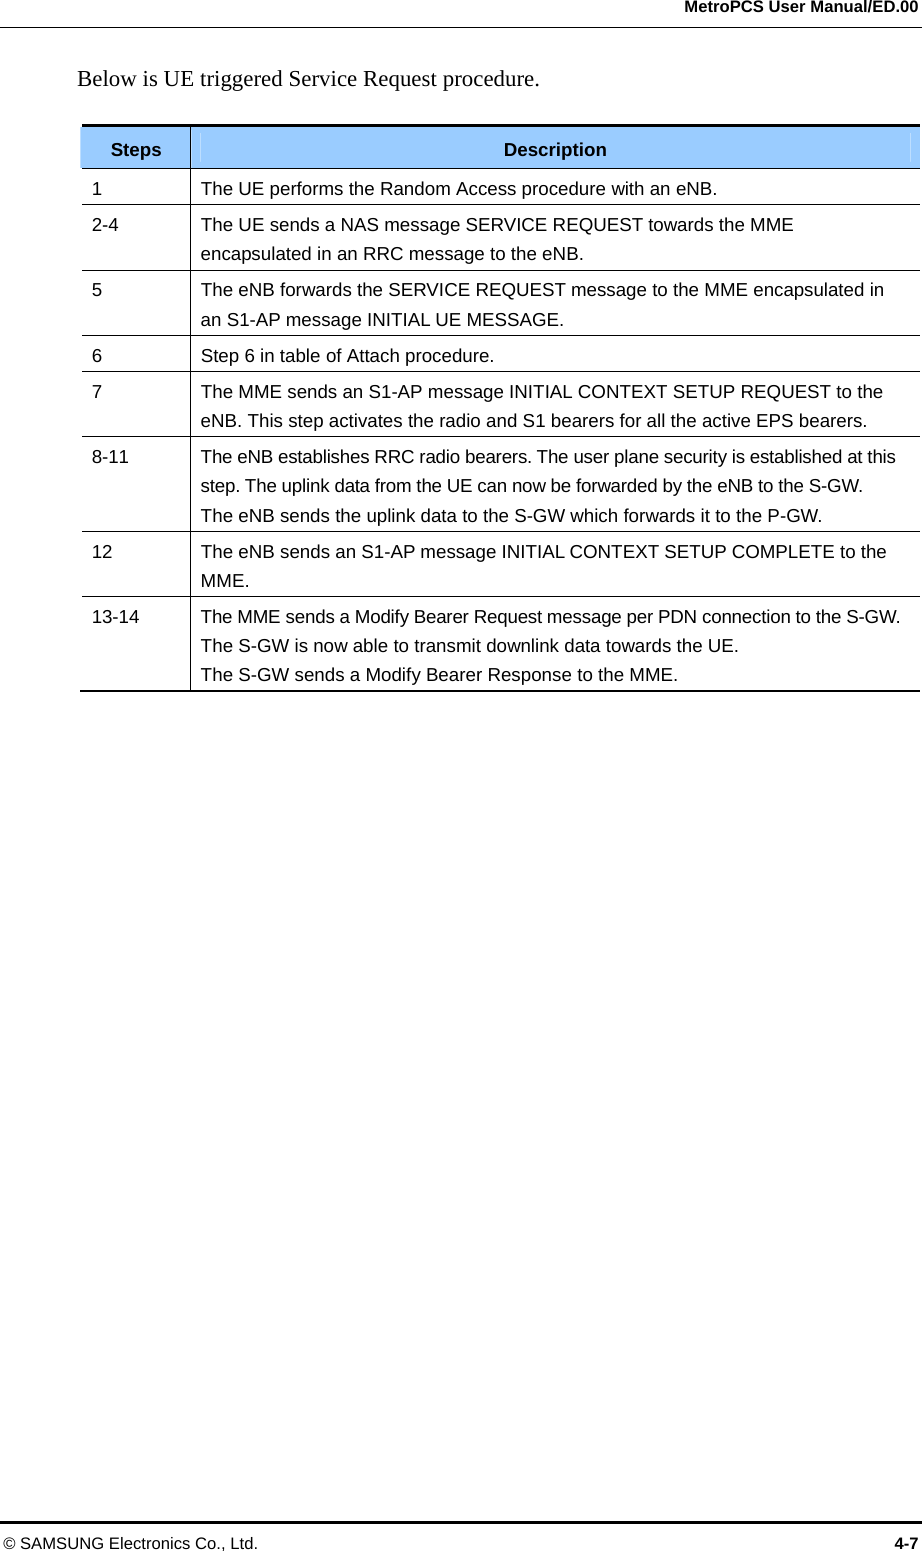  MetroPCS User Manual/ED.00 © SAMSUNG Electronics Co., Ltd.  4-7 Below is UE triggered Service Request procedure.  Steps  Description 1  The UE performs the Random Access procedure with an eNB. 2-4  The UE sends a NAS message SERVICE REQUEST towards the MME encapsulated in an RRC message to the eNB. 5  The eNB forwards the SERVICE REQUEST message to the MME encapsulated in an S1-AP message INITIAL UE MESSAGE. 6  Step 6 in table of Attach procedure. 7  The MME sends an S1-AP message INITIAL CONTEXT SETUP REQUEST to the eNB. This step activates the radio and S1 bearers for all the active EPS bearers. 8-11  The eNB establishes RRC radio bearers. The user plane security is established at this step. The uplink data from the UE can now be forwarded by the eNB to the S-GW. The eNB sends the uplink data to the S-GW which forwards it to the P-GW. 12  The eNB sends an S1-AP message INITIAL CONTEXT SETUP COMPLETE to the MME. 13-14  The MME sends a Modify Bearer Request message per PDN connection to the S-GW. The S-GW is now able to transmit downlink data towards the UE. The S-GW sends a Modify Bearer Response to the MME.  